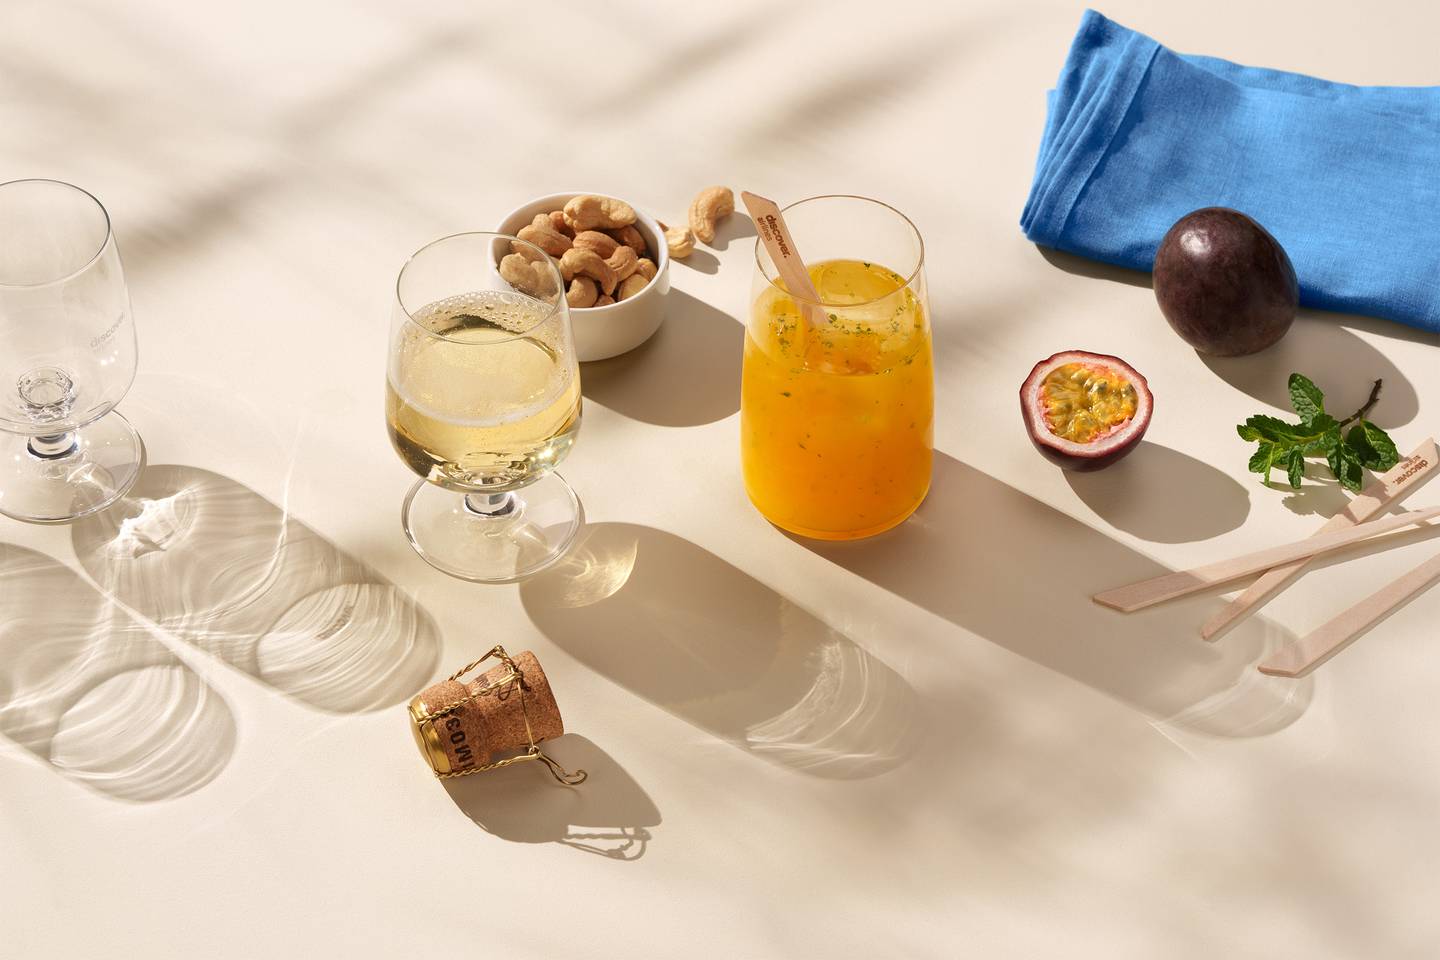 A glass of sparkling wine, an orange bay cocktail and a small bowl of nuts lie on a table